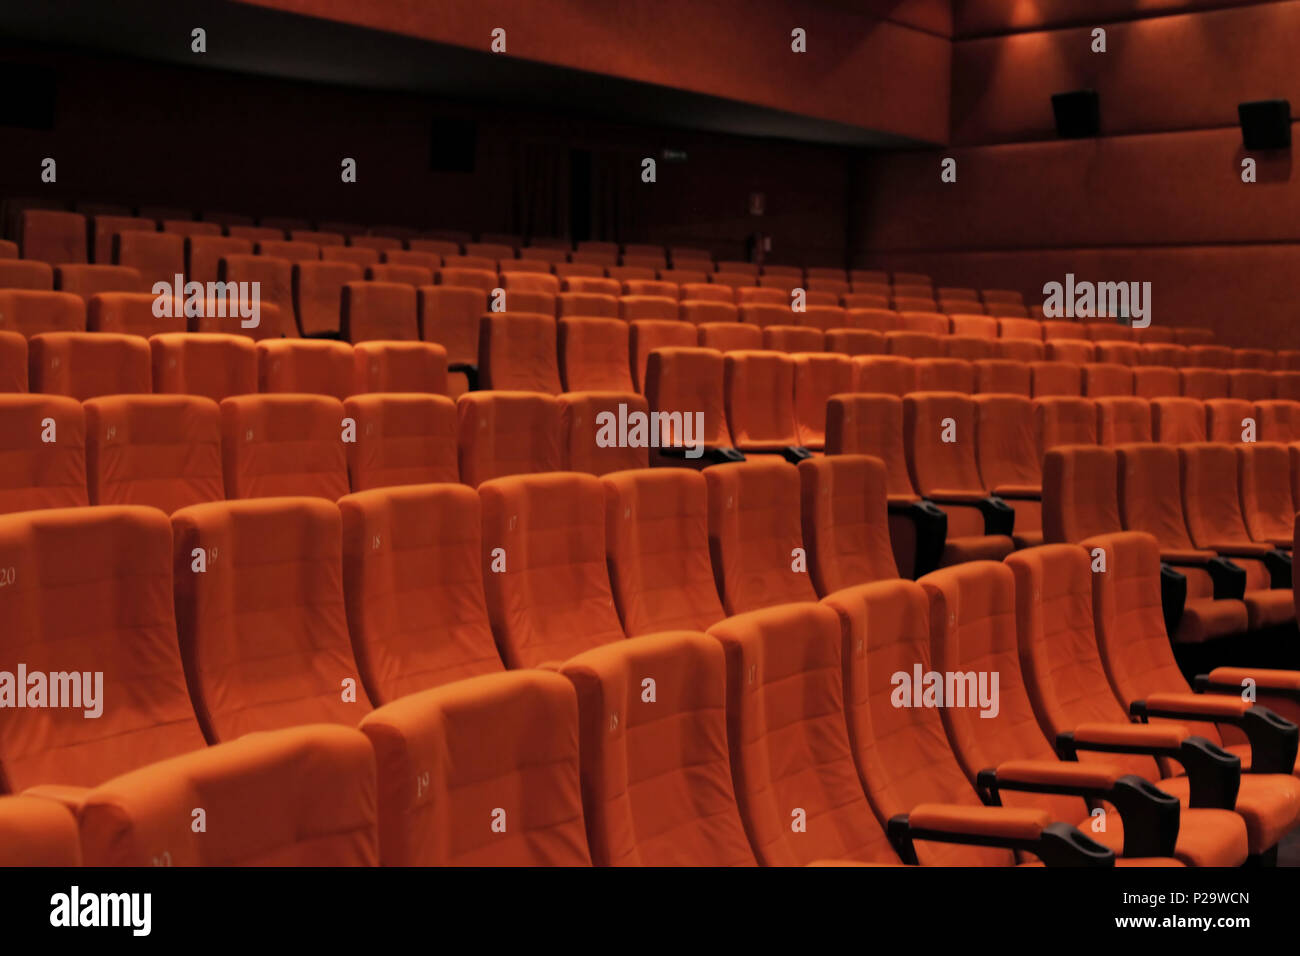 Red Velvet Seats In Row And Walls Of A Cinema Or Theater